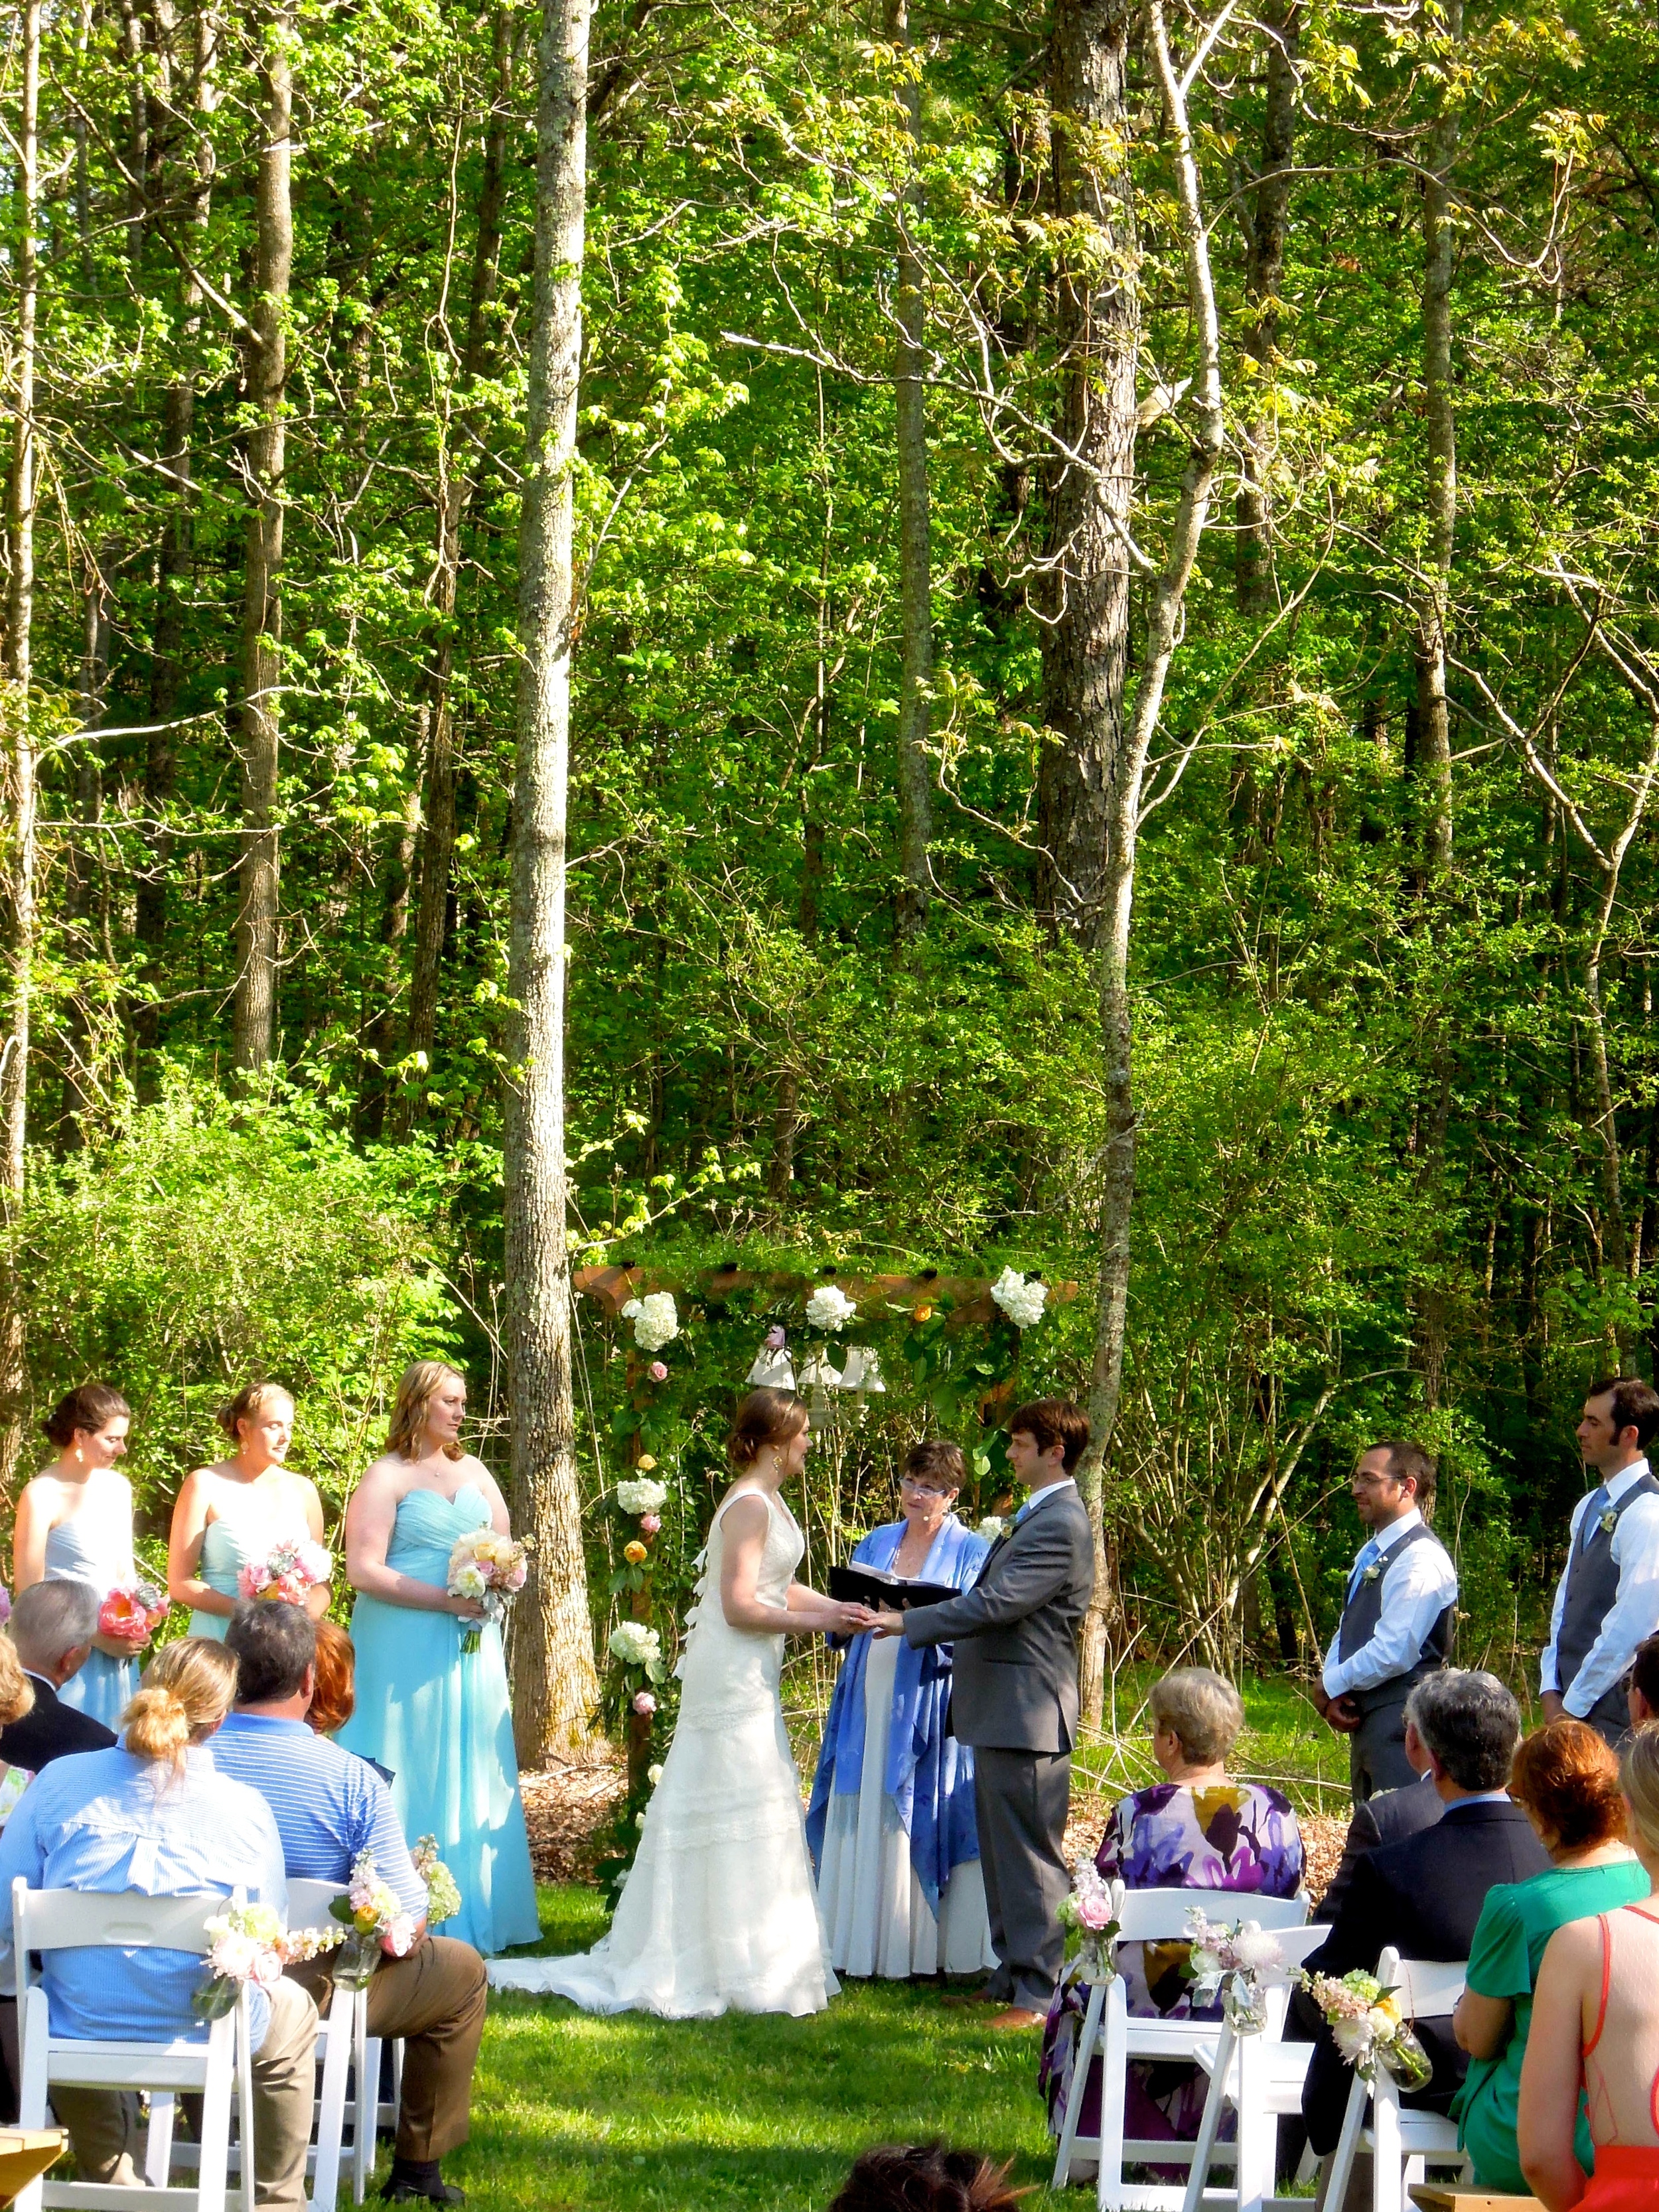 Wedding Ceremony Surrounded by Nature